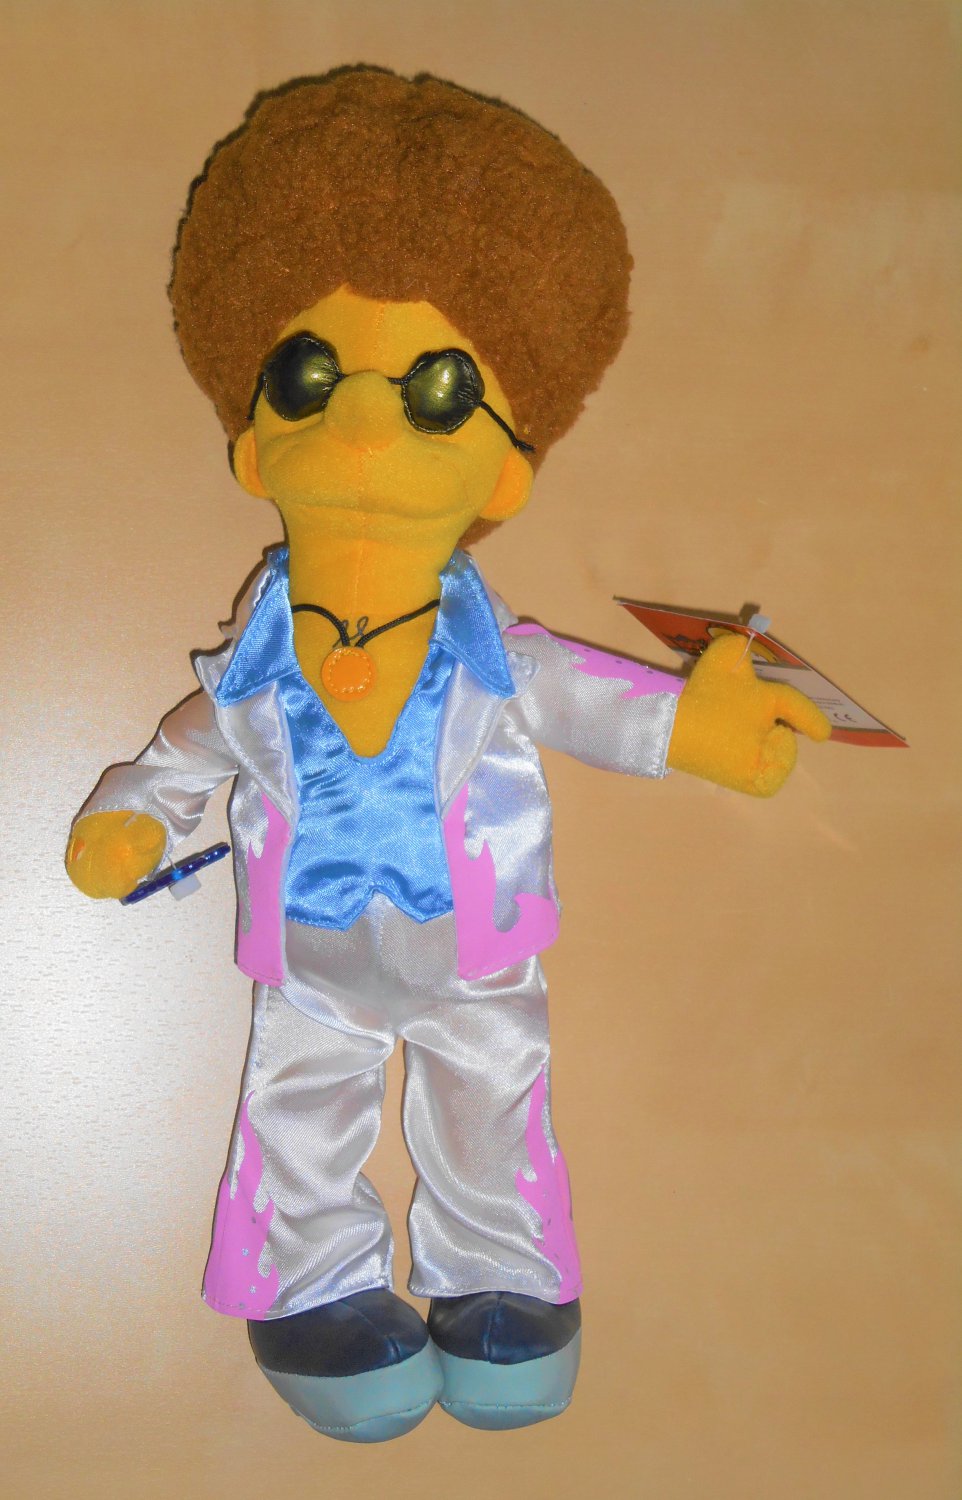 14 Inch The Simpsons Disco Stu Plush Doll Stuffed Toy Applause 2004 With Tags